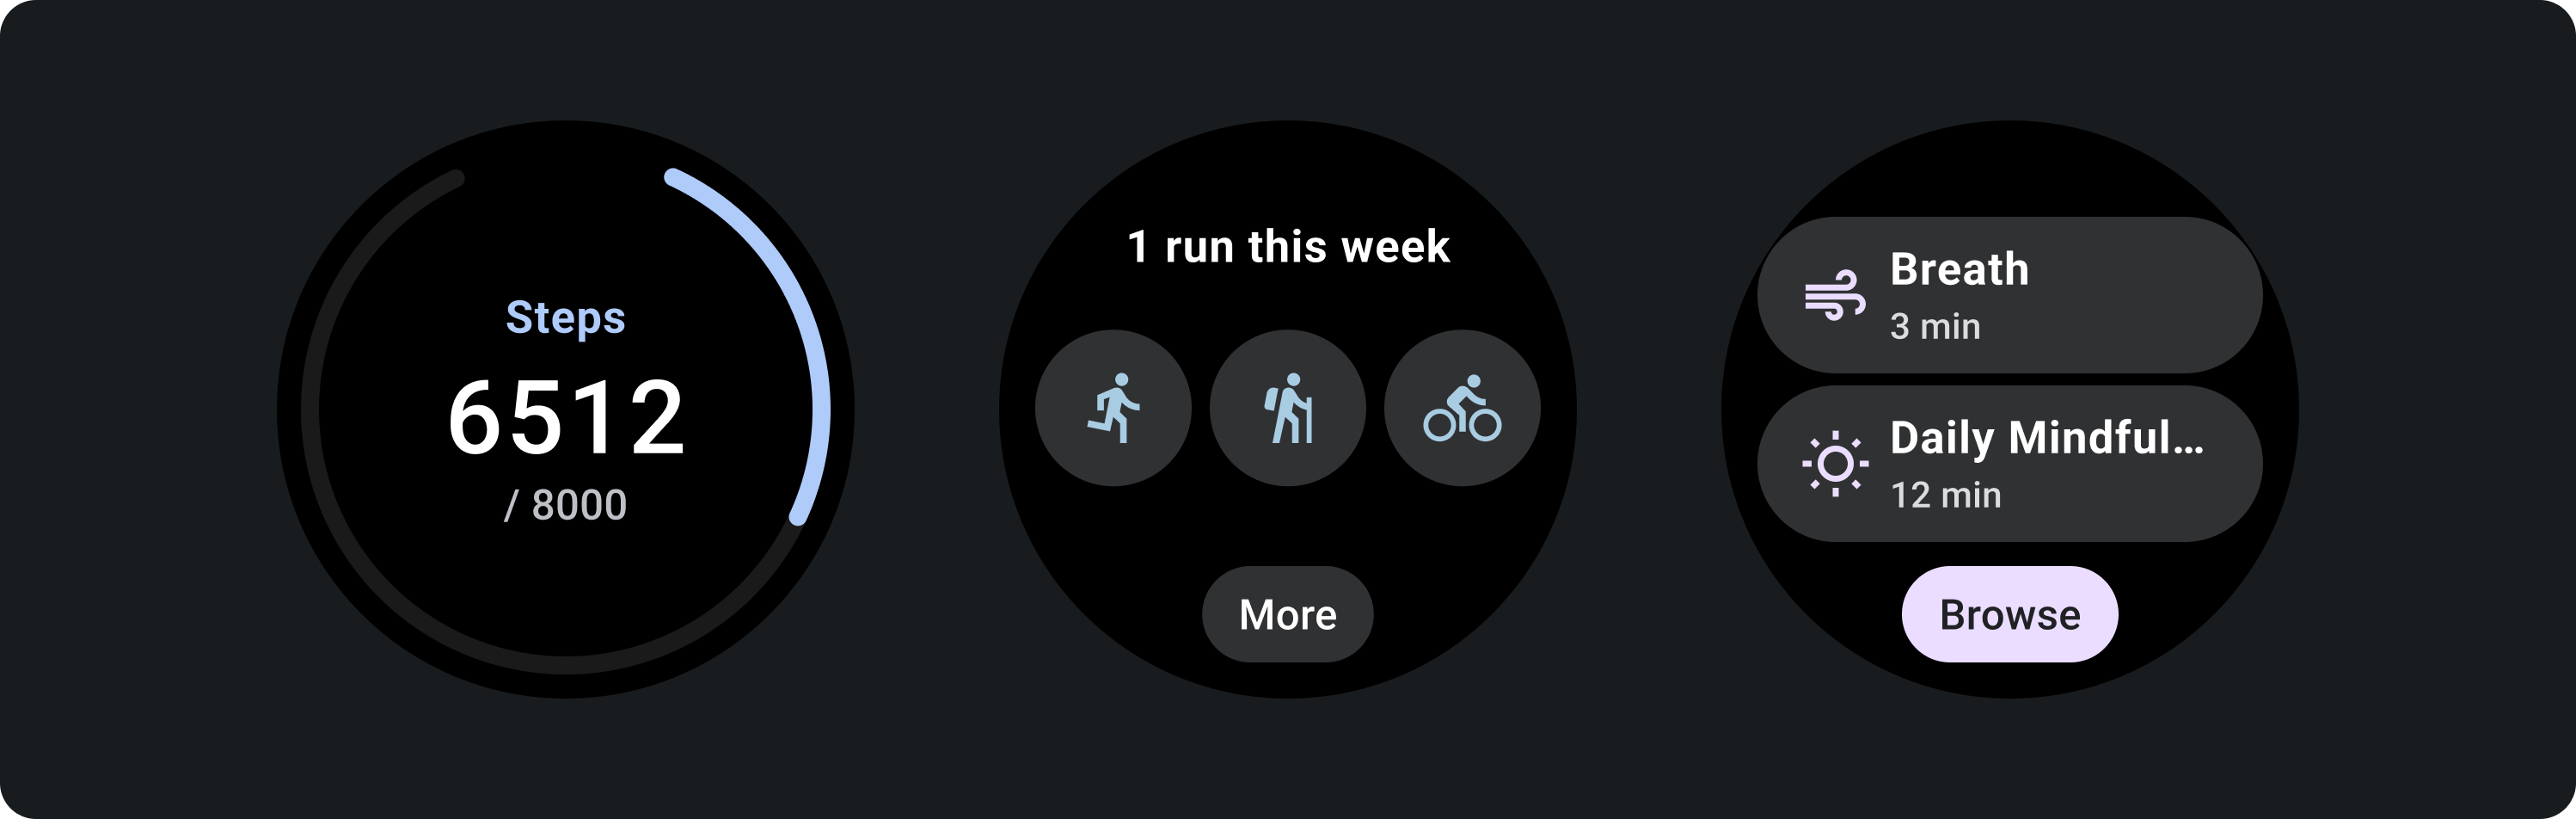 Step count, workouts this week, and mindfulness tasks